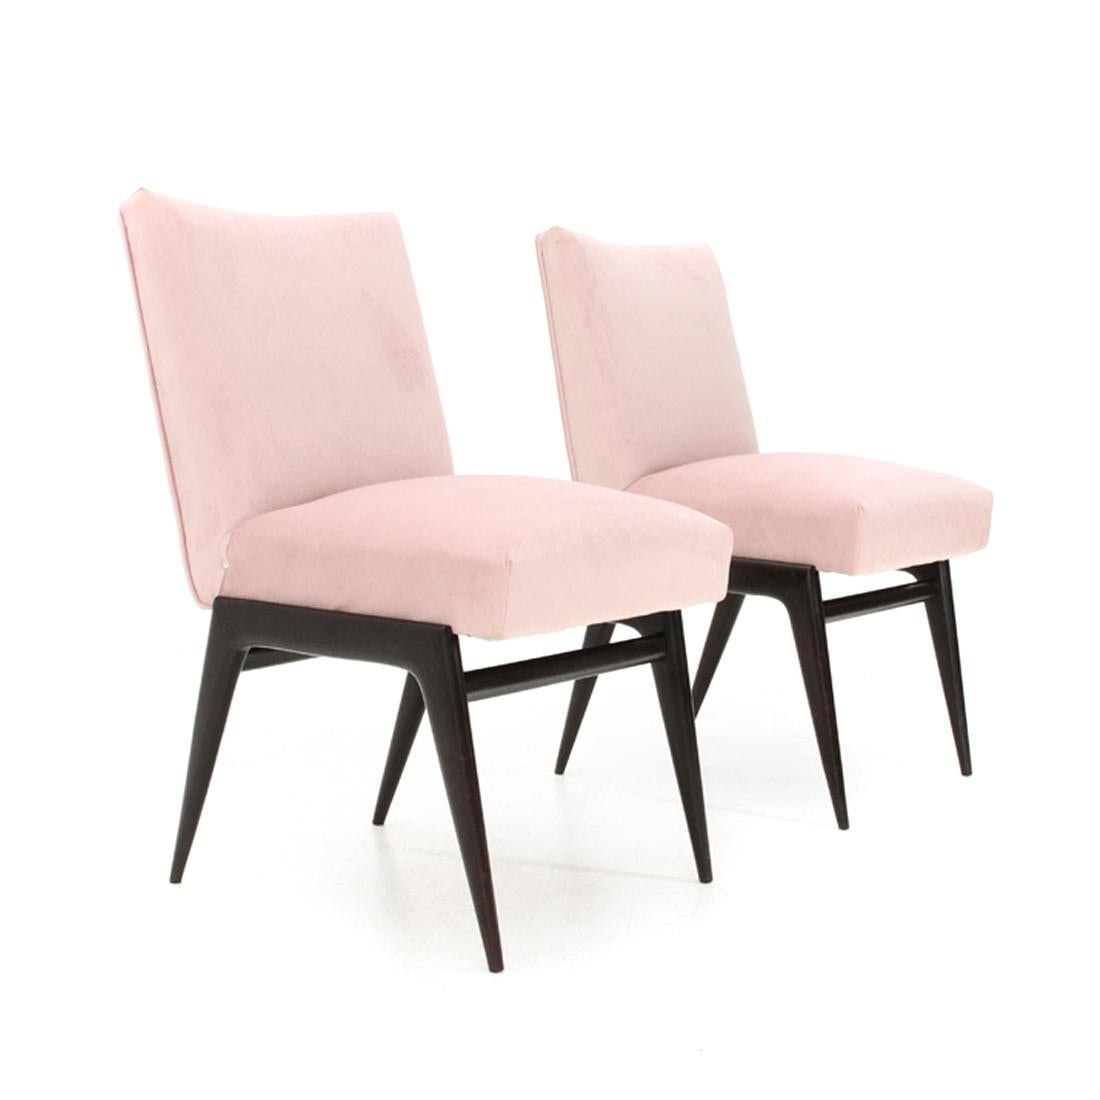 Pair of Italian-made armchairs produced in the 1950s.
Solid wood structure.
Seat and back in wood padded and lined in pink velvet.
Good general condition, some signs due to normal use over time.

Dimensions: Length 46 cm, depth 55 cm, height 80